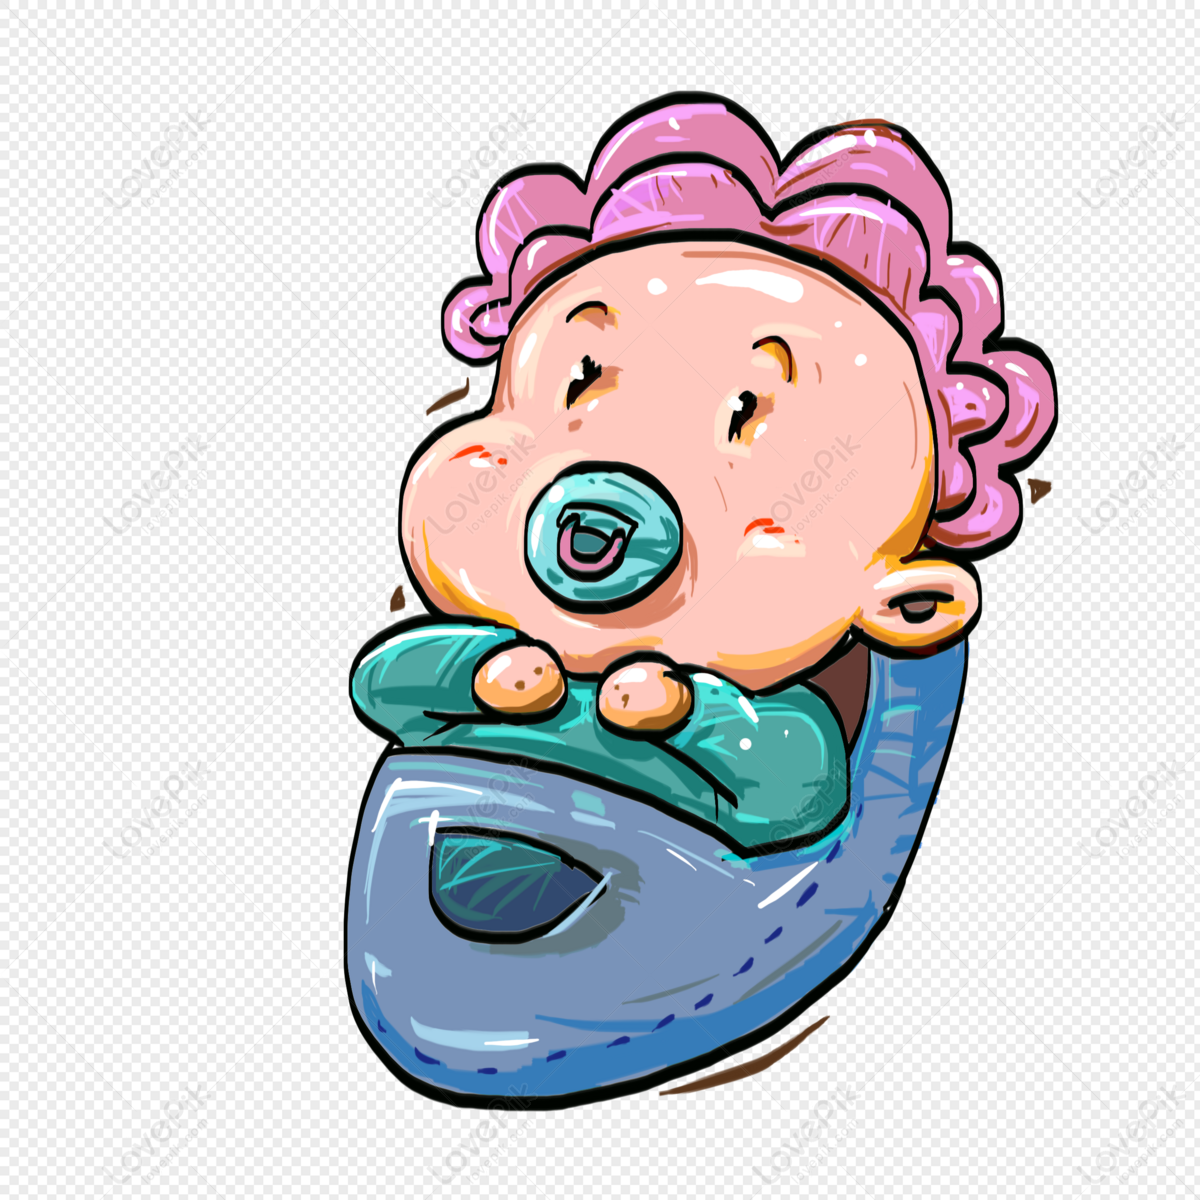 Cute Baby Images, HD Pictures For Free Vectors Download 